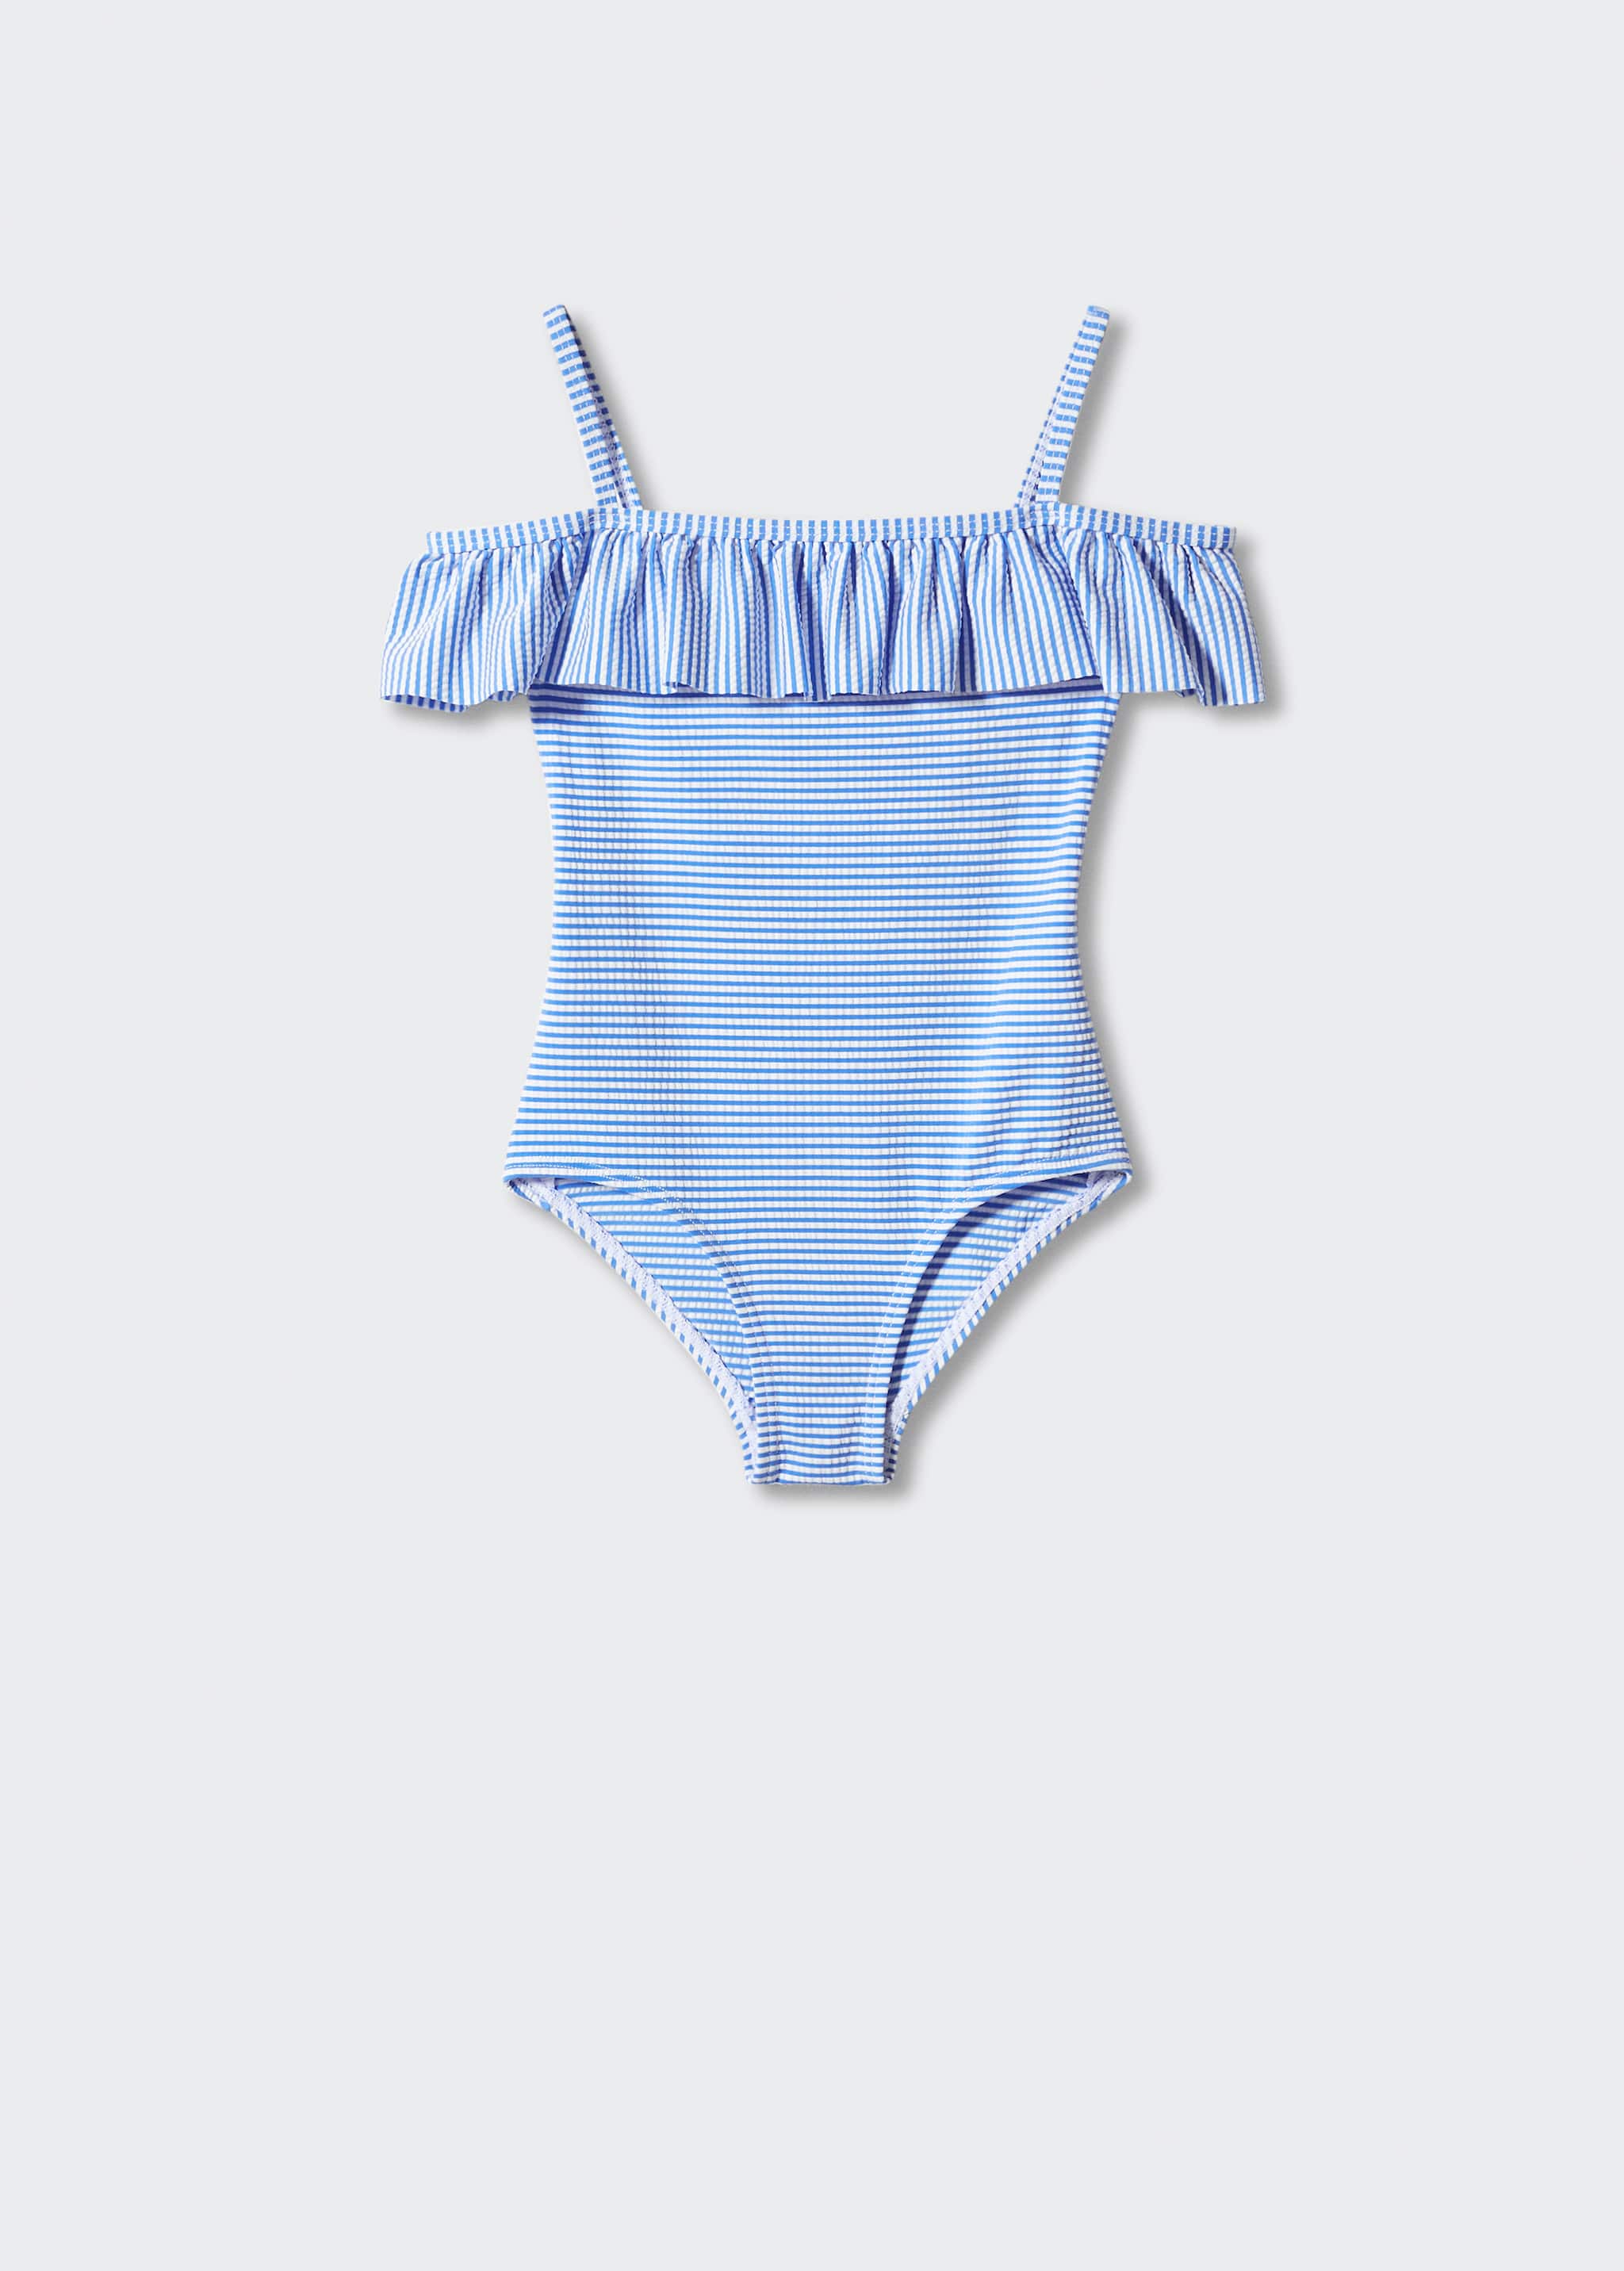 Ruffle striped swimsuit - Article without model